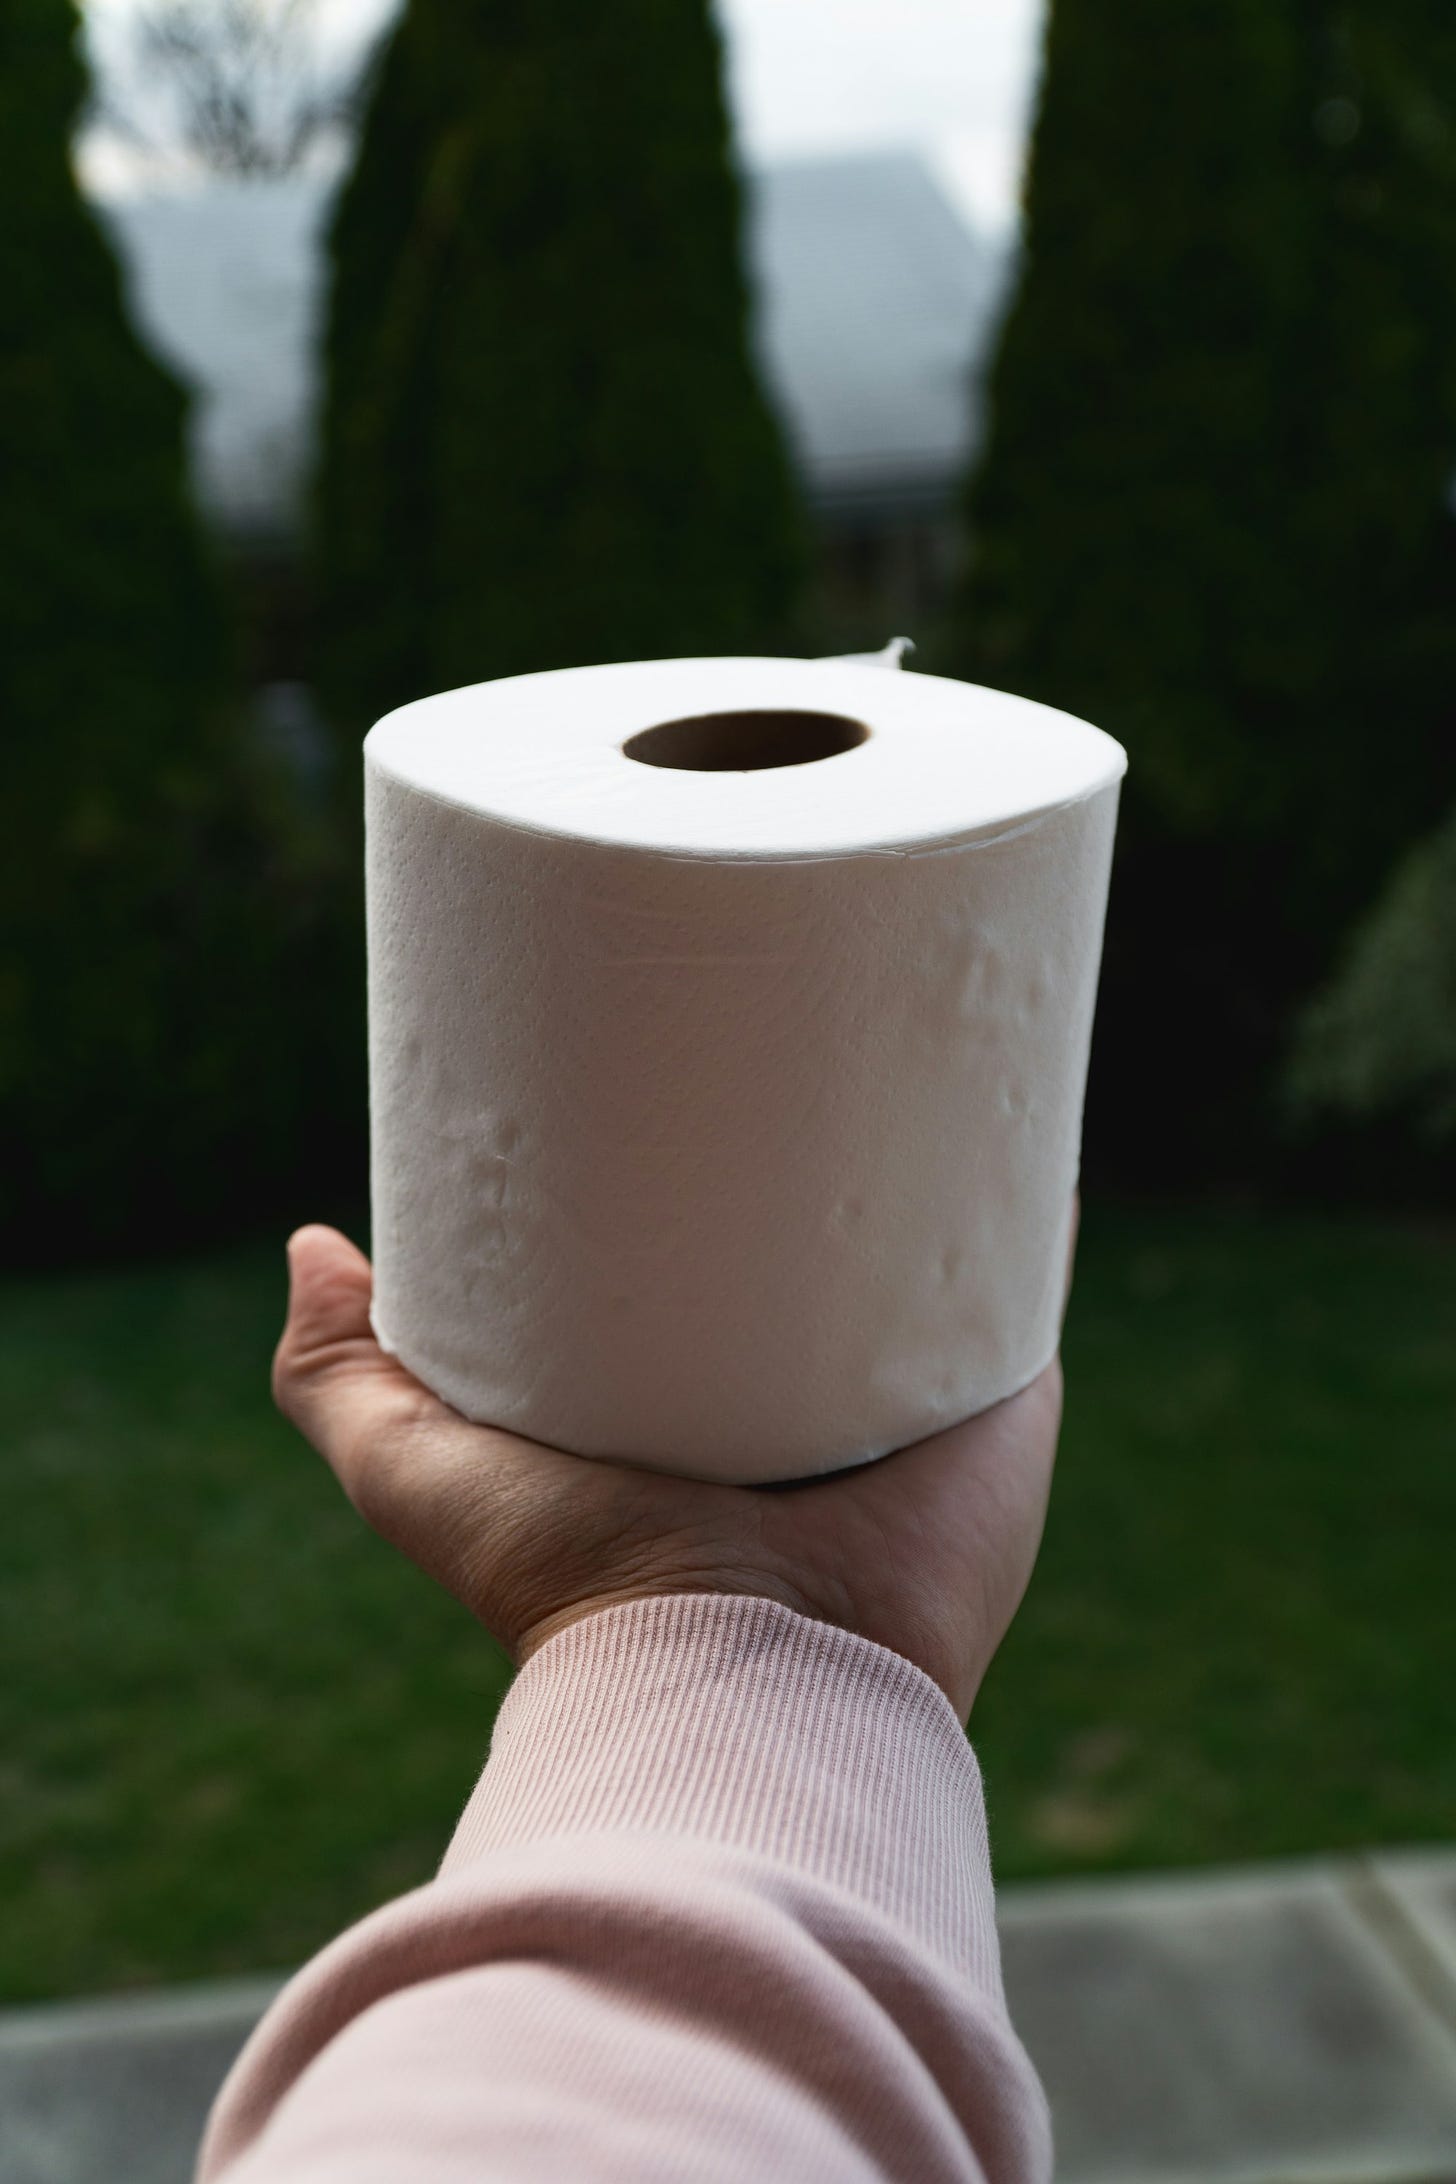 The Toilet Paper Between You and Me